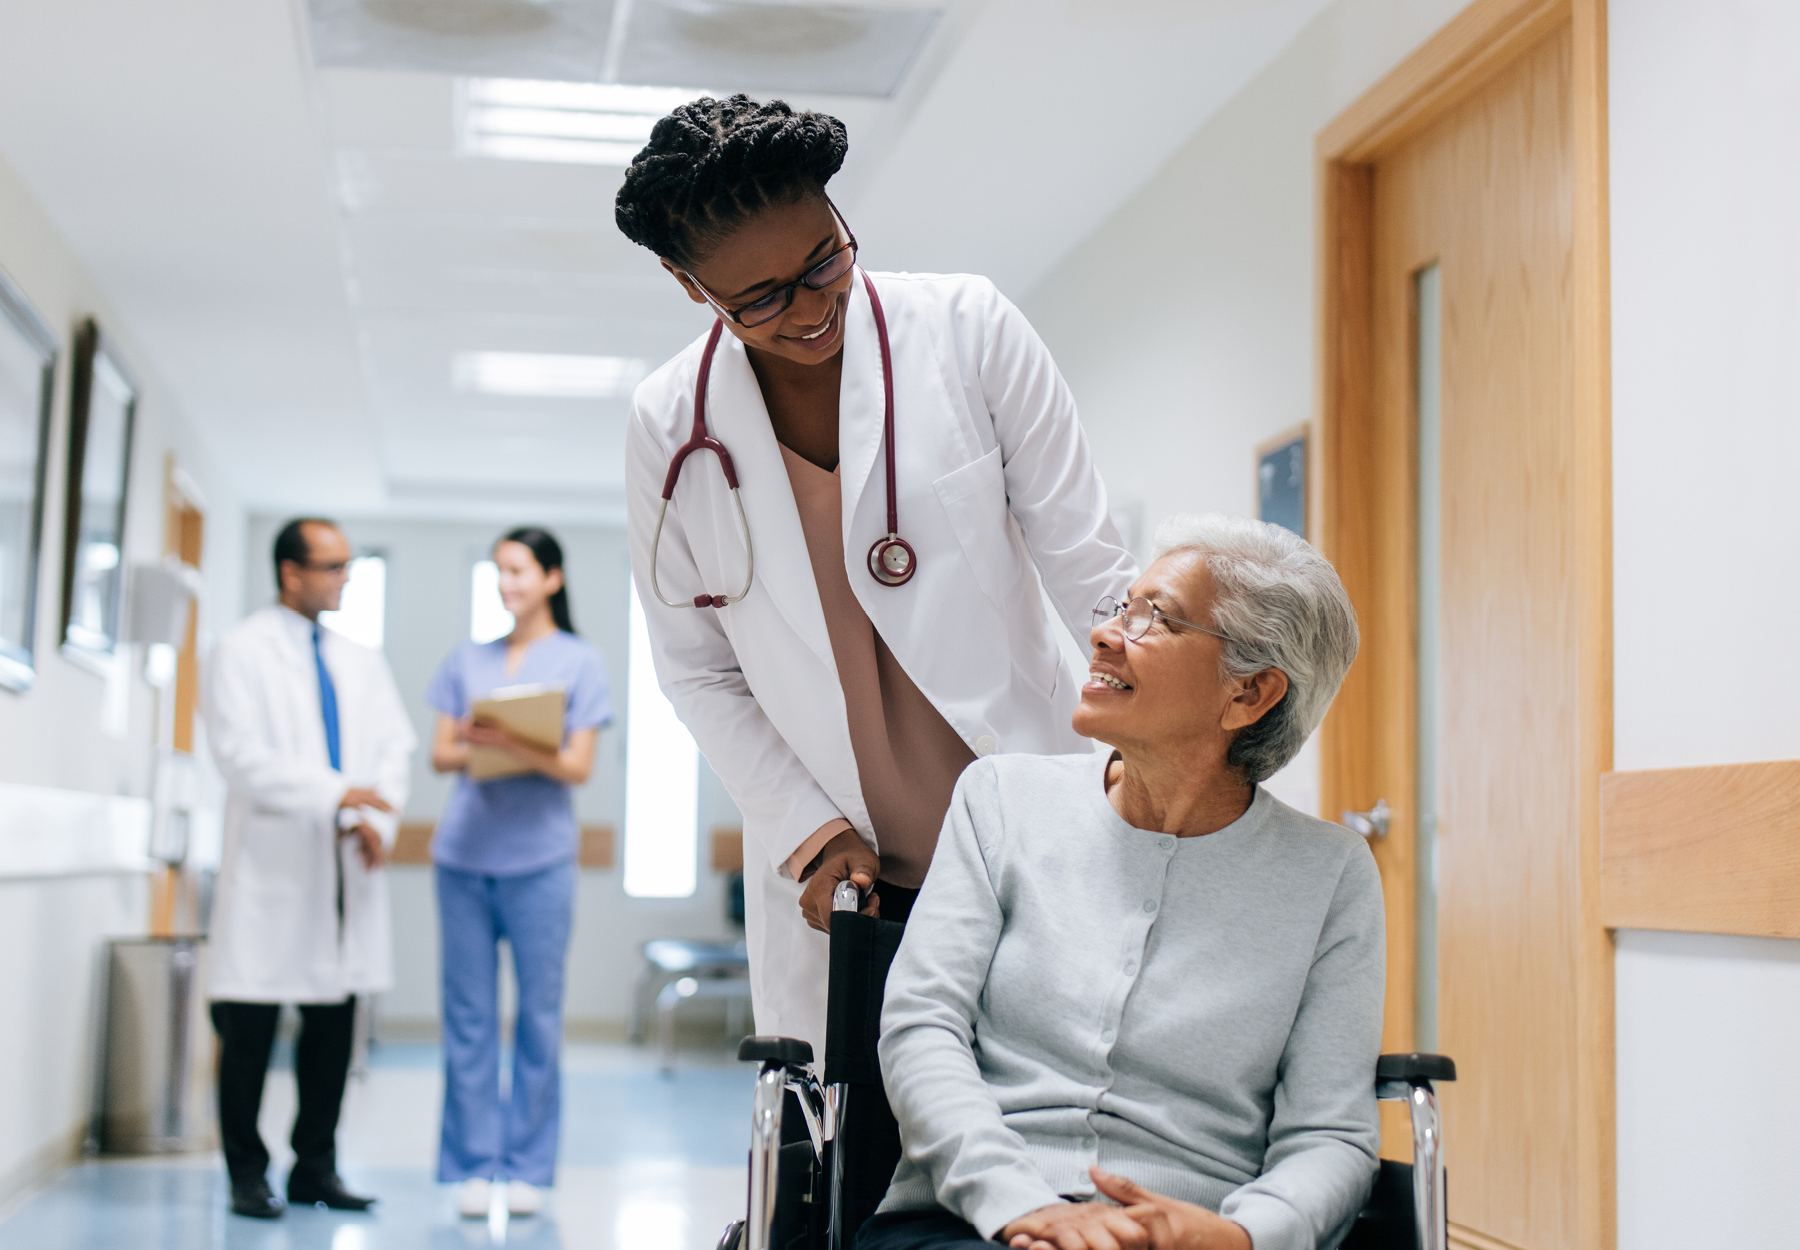 African American doctor pushes an elderly patient of Asian descent in a wheelchair down a hospital hallway. Two hospital staff members can be seen in the background. Stock photo.